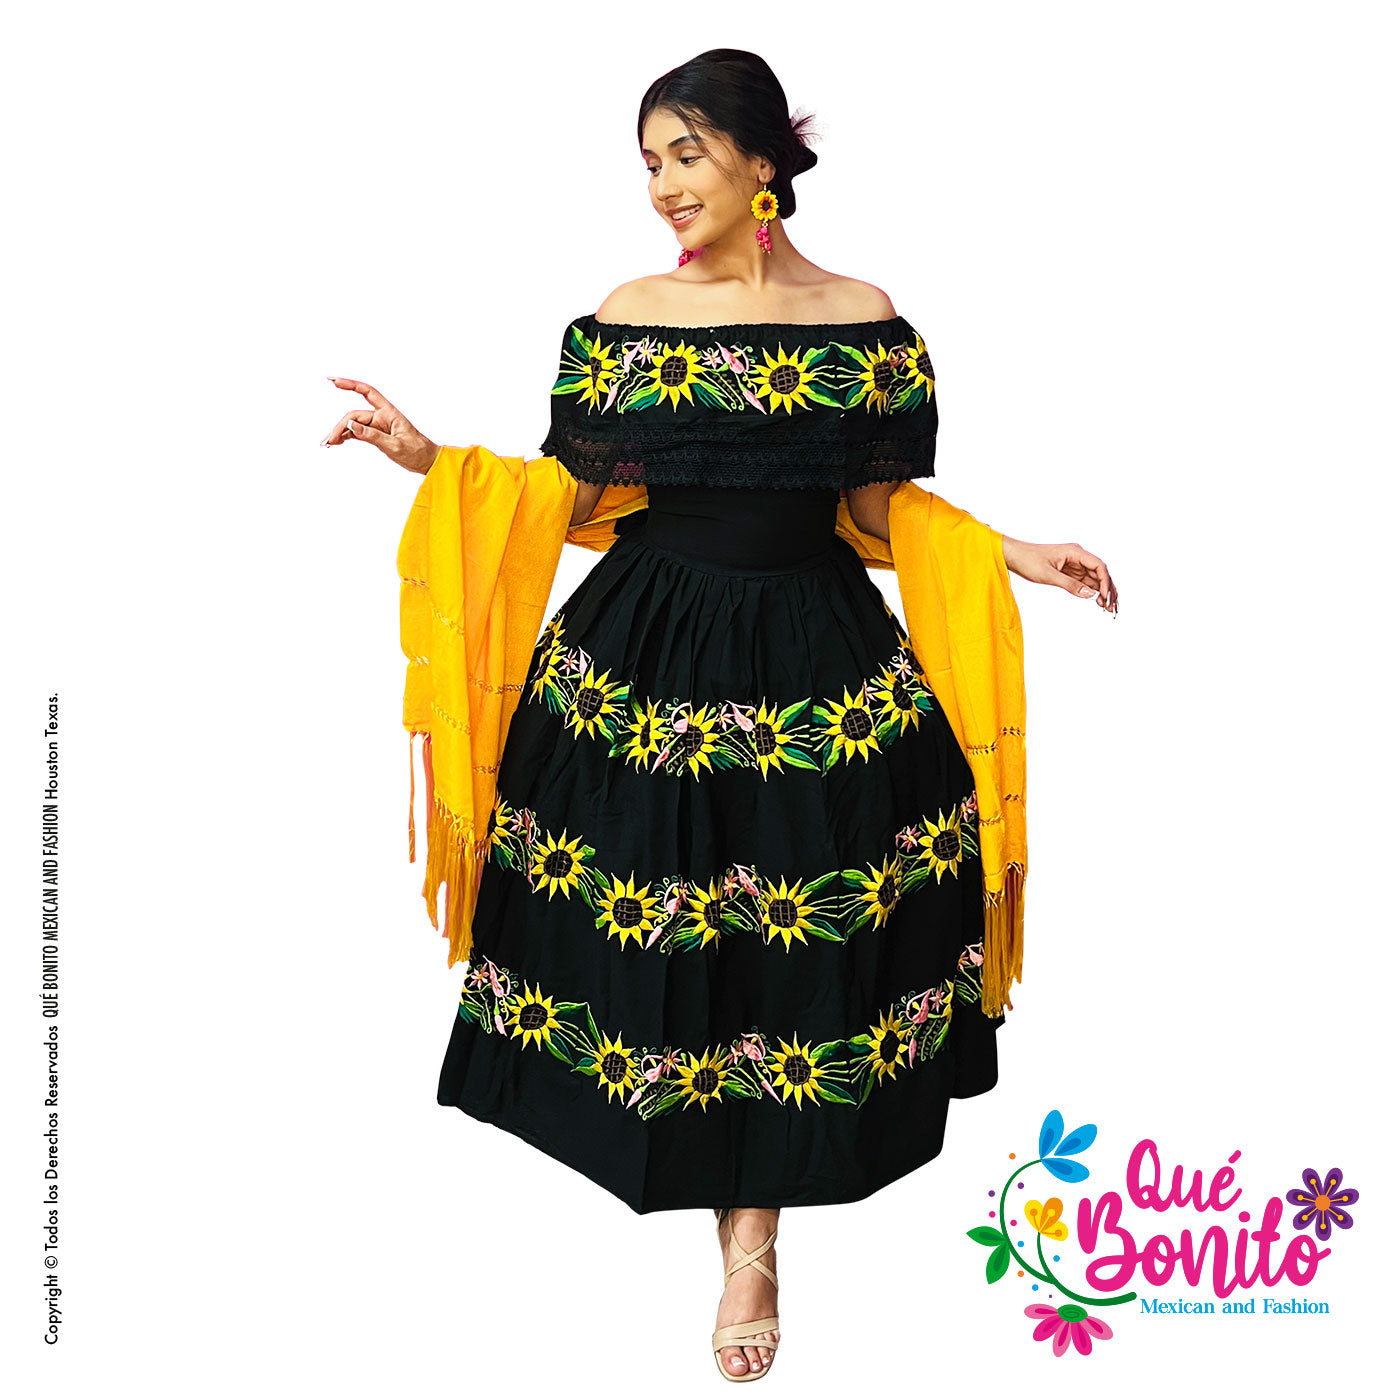 Fiesta Party Dress Sunflower Que Bonito Mexican and Fashion